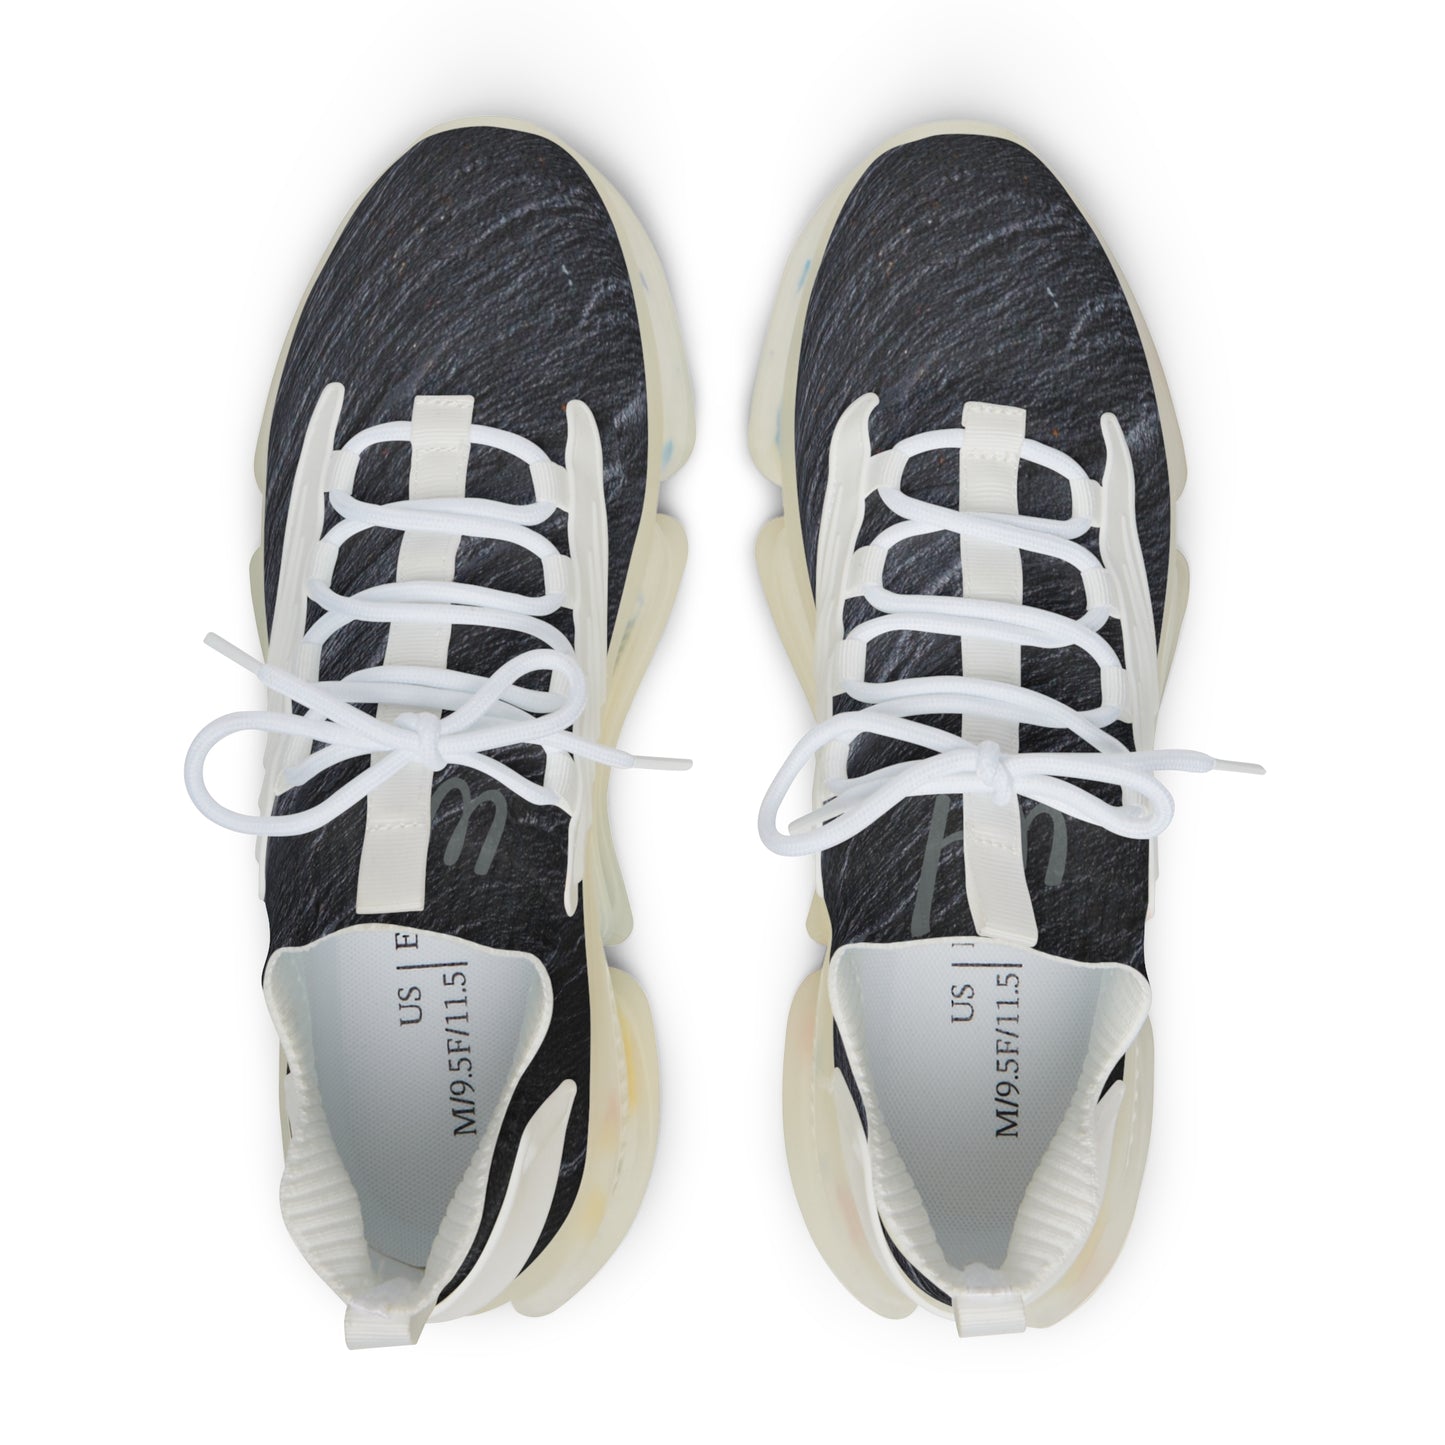 Men's Casual/Running Shoes | WORTHLESS